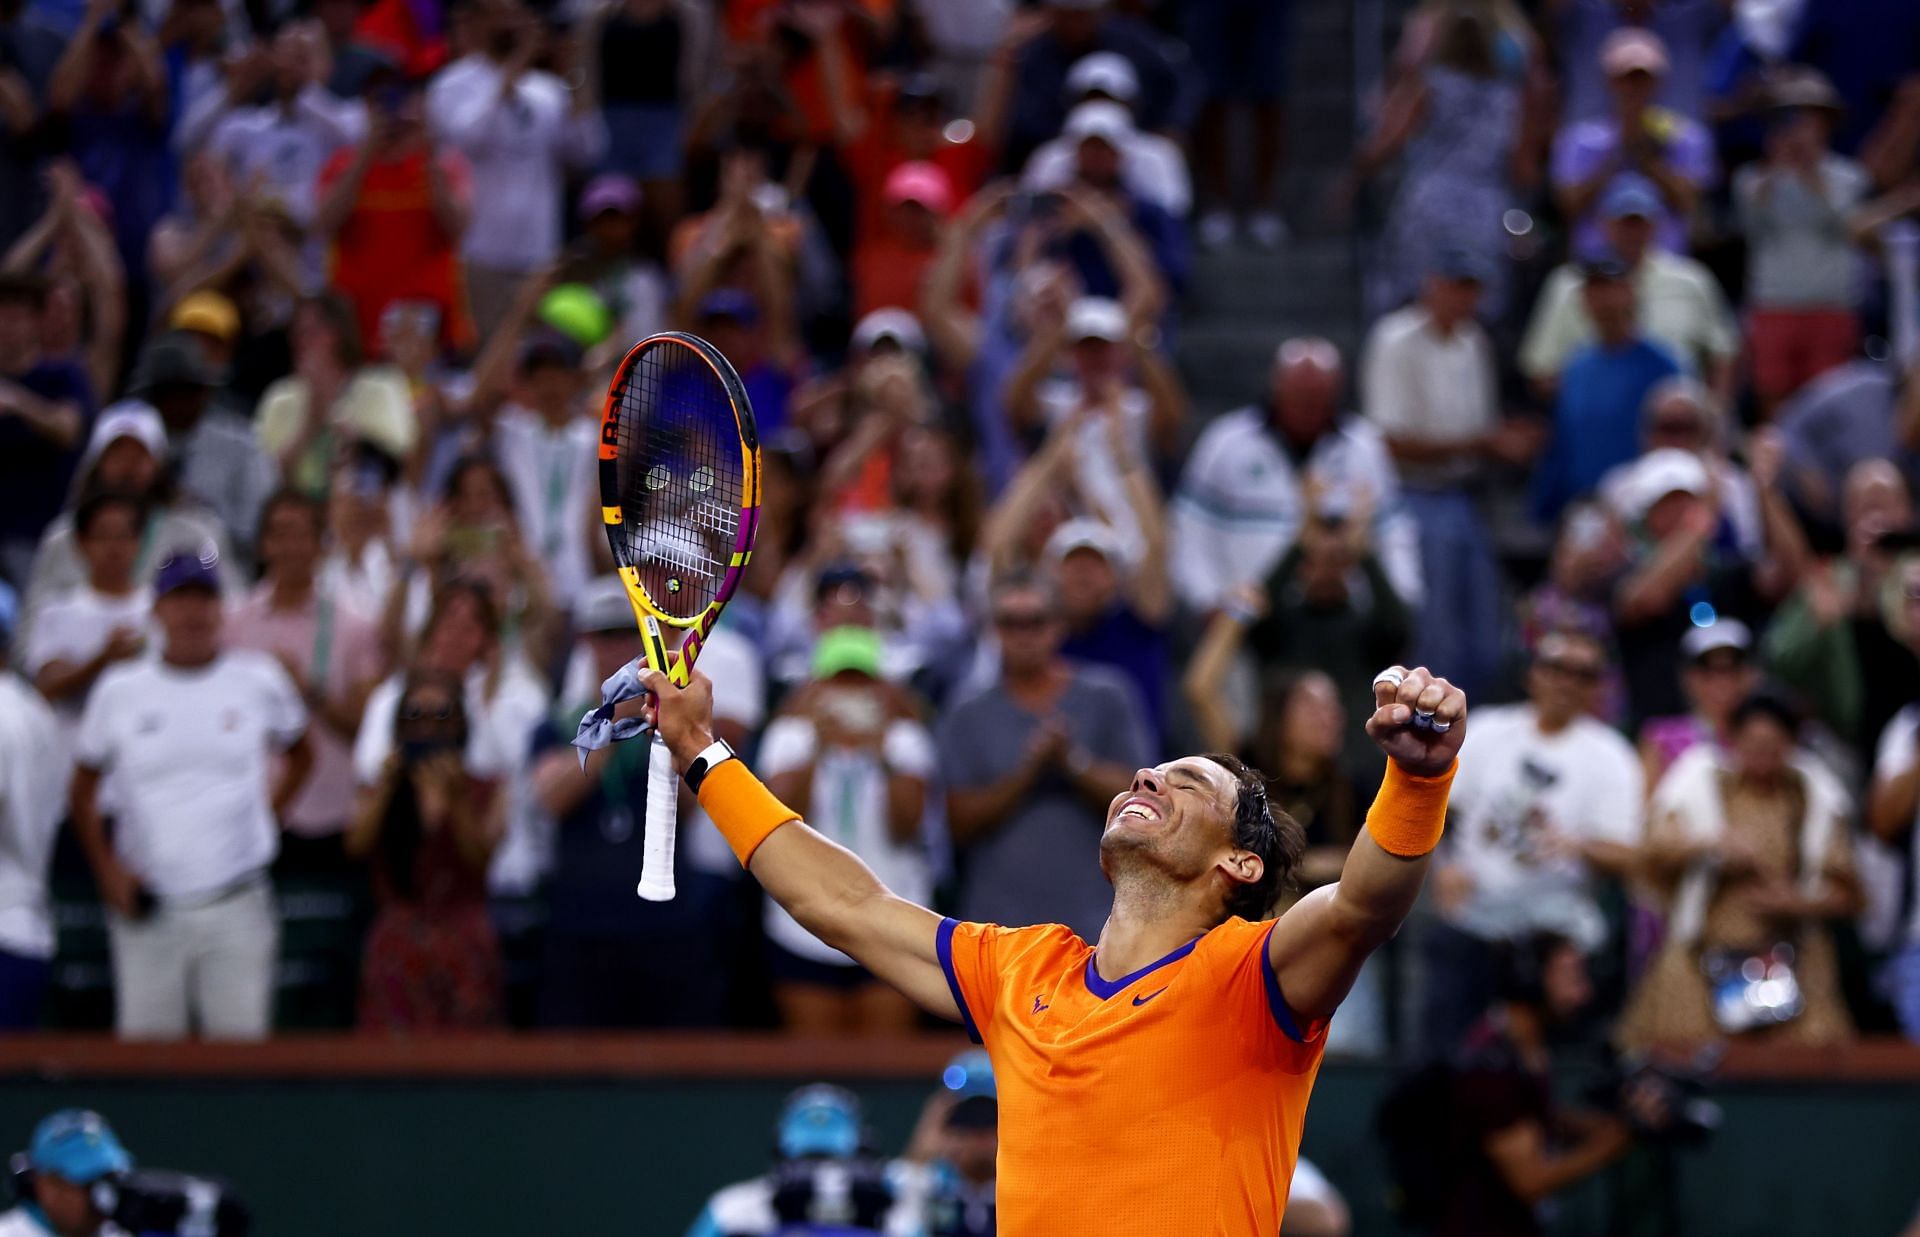 Nadal remained unbeaten in 81 matches on clay from 2005-2007